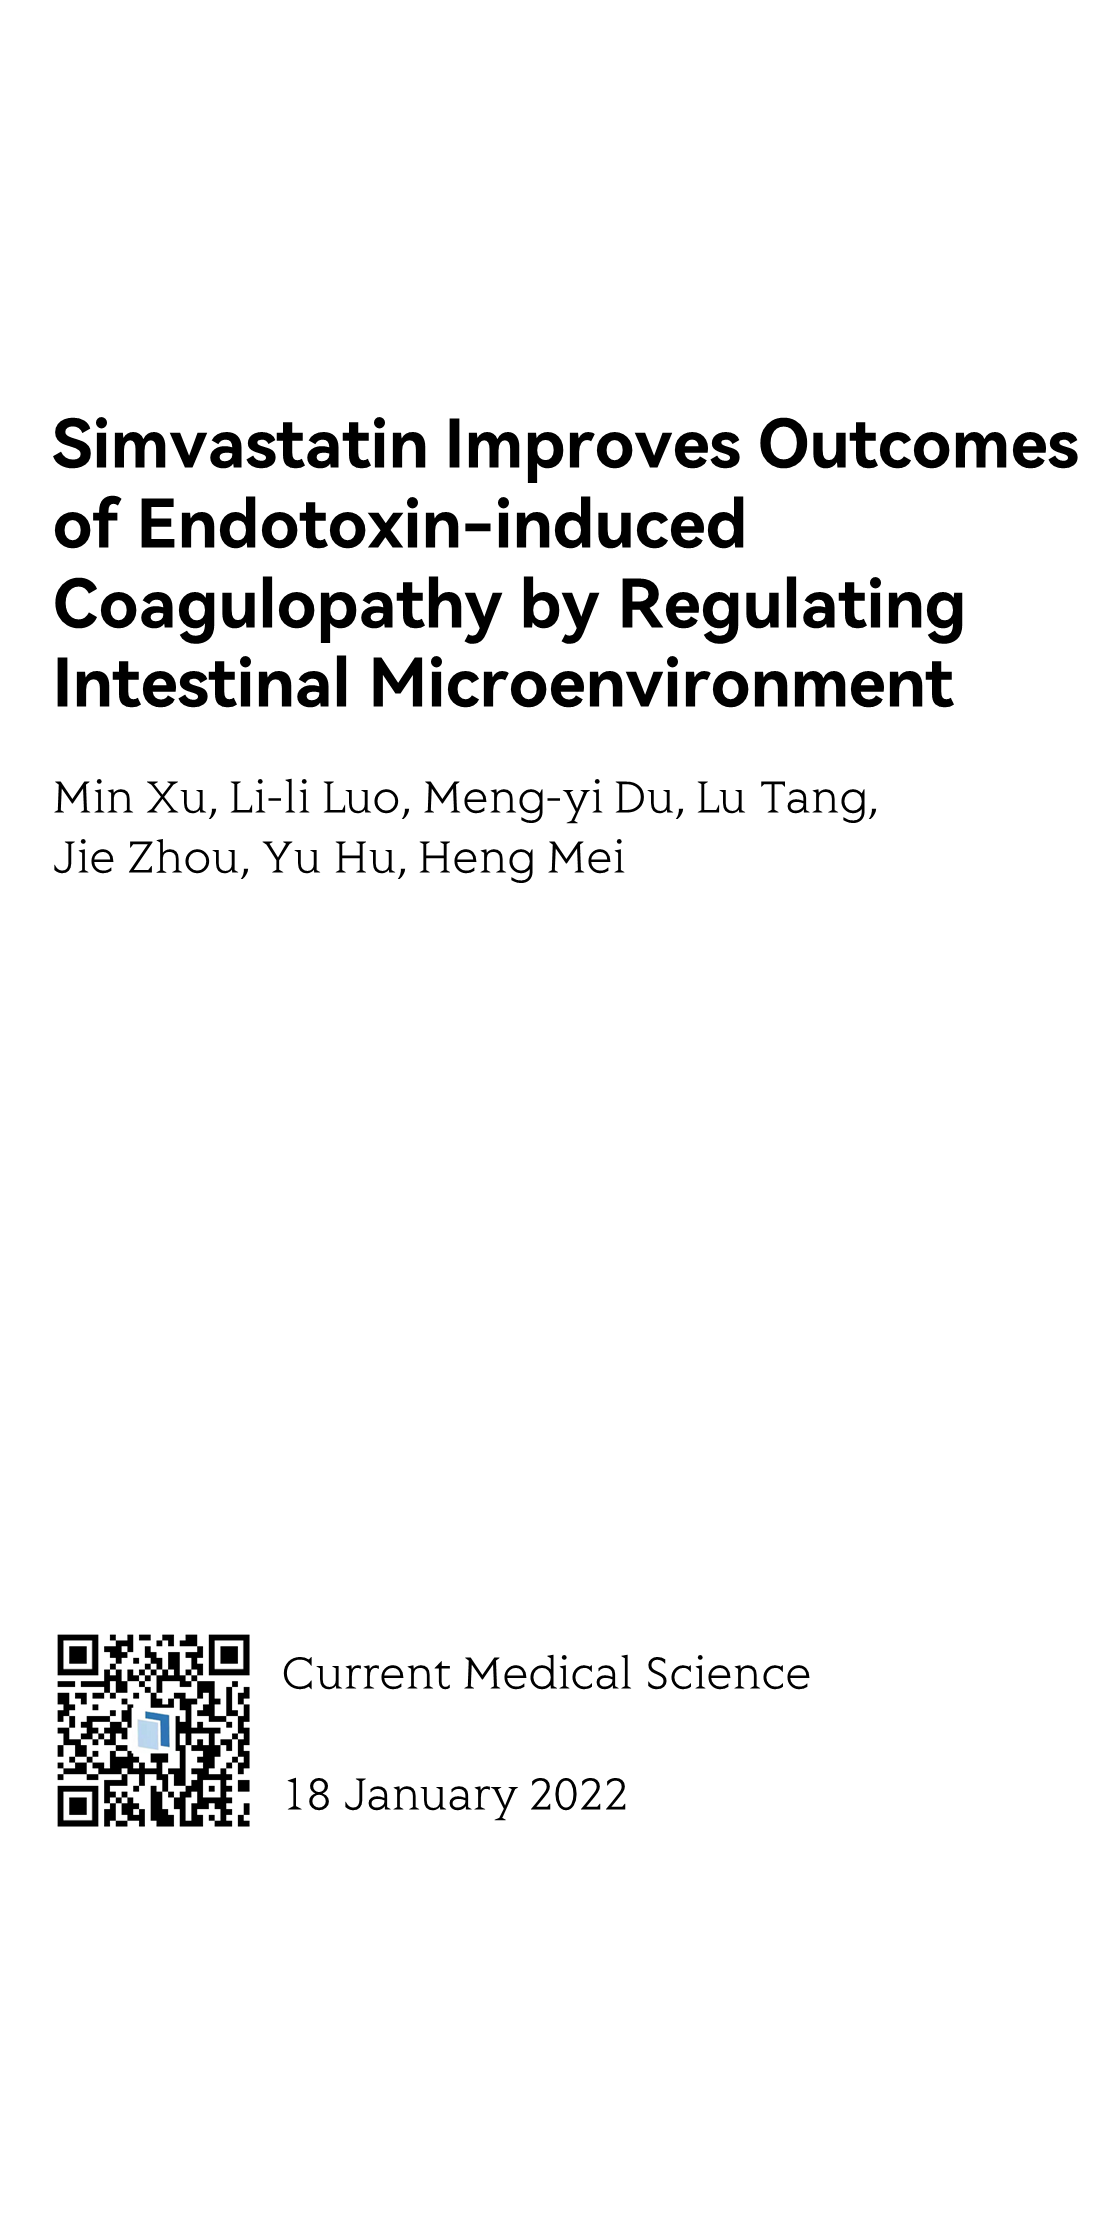 Simvastatin Improves Outcomes of Endotoxin-induced Coagulopathy by Regulating Intestinal Microenvironment_1